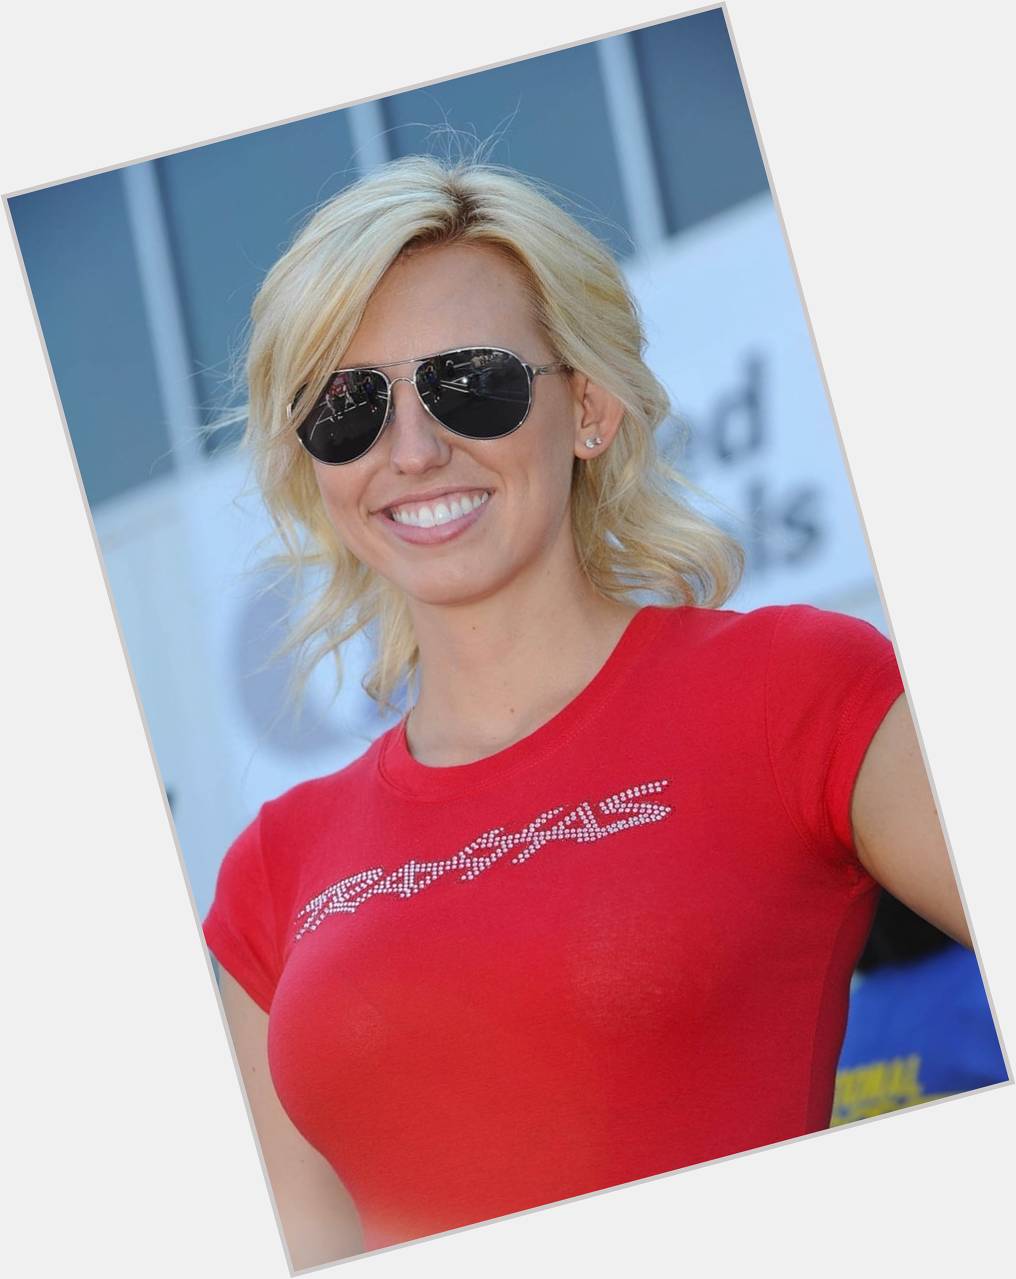 Https://fanpagepress.net/m/C/Courtney Force Exclusive Hot Pic 5